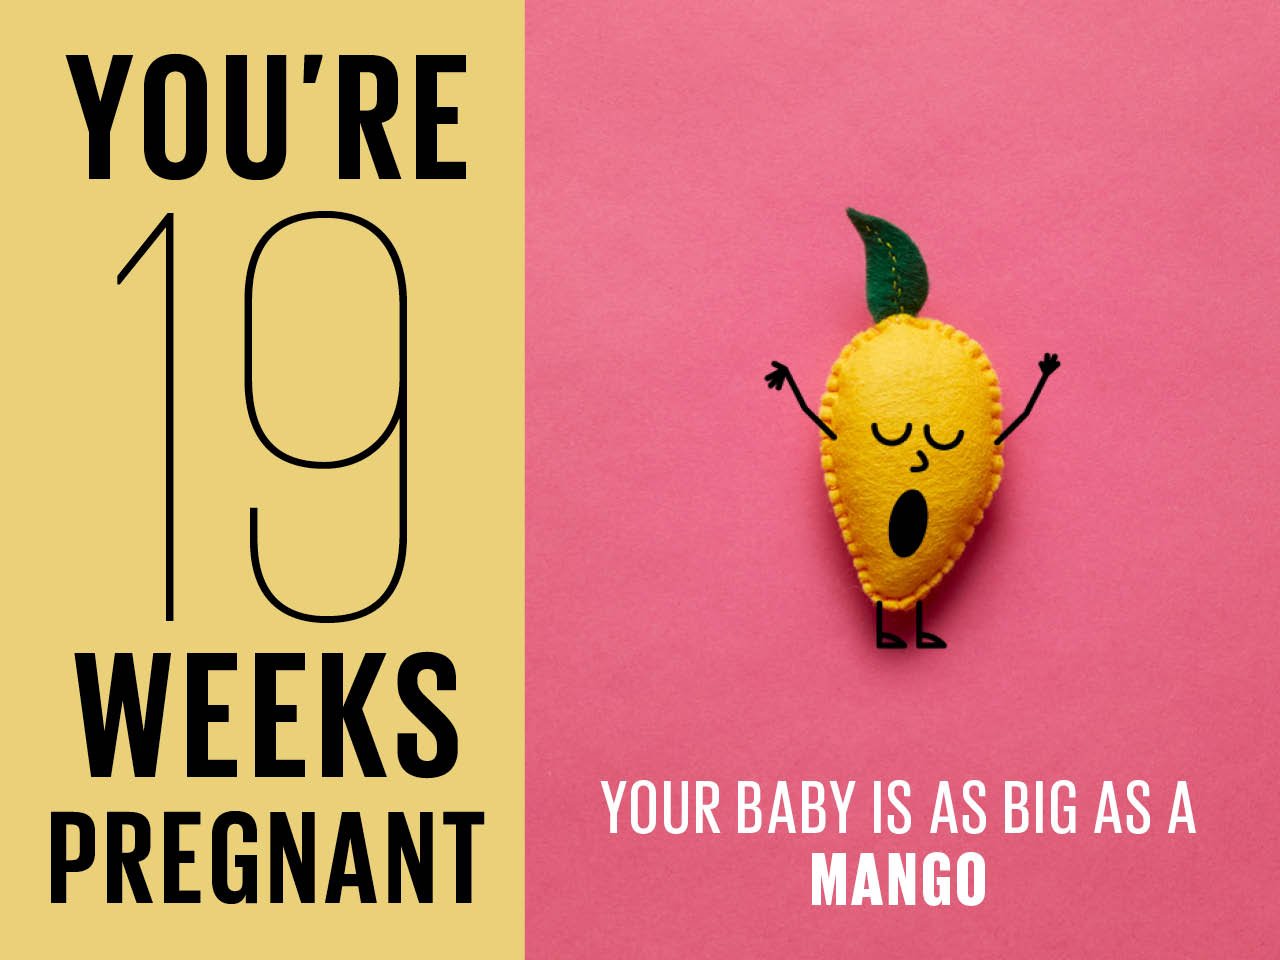 Felt mango used to show how big baby is at 19 weeks